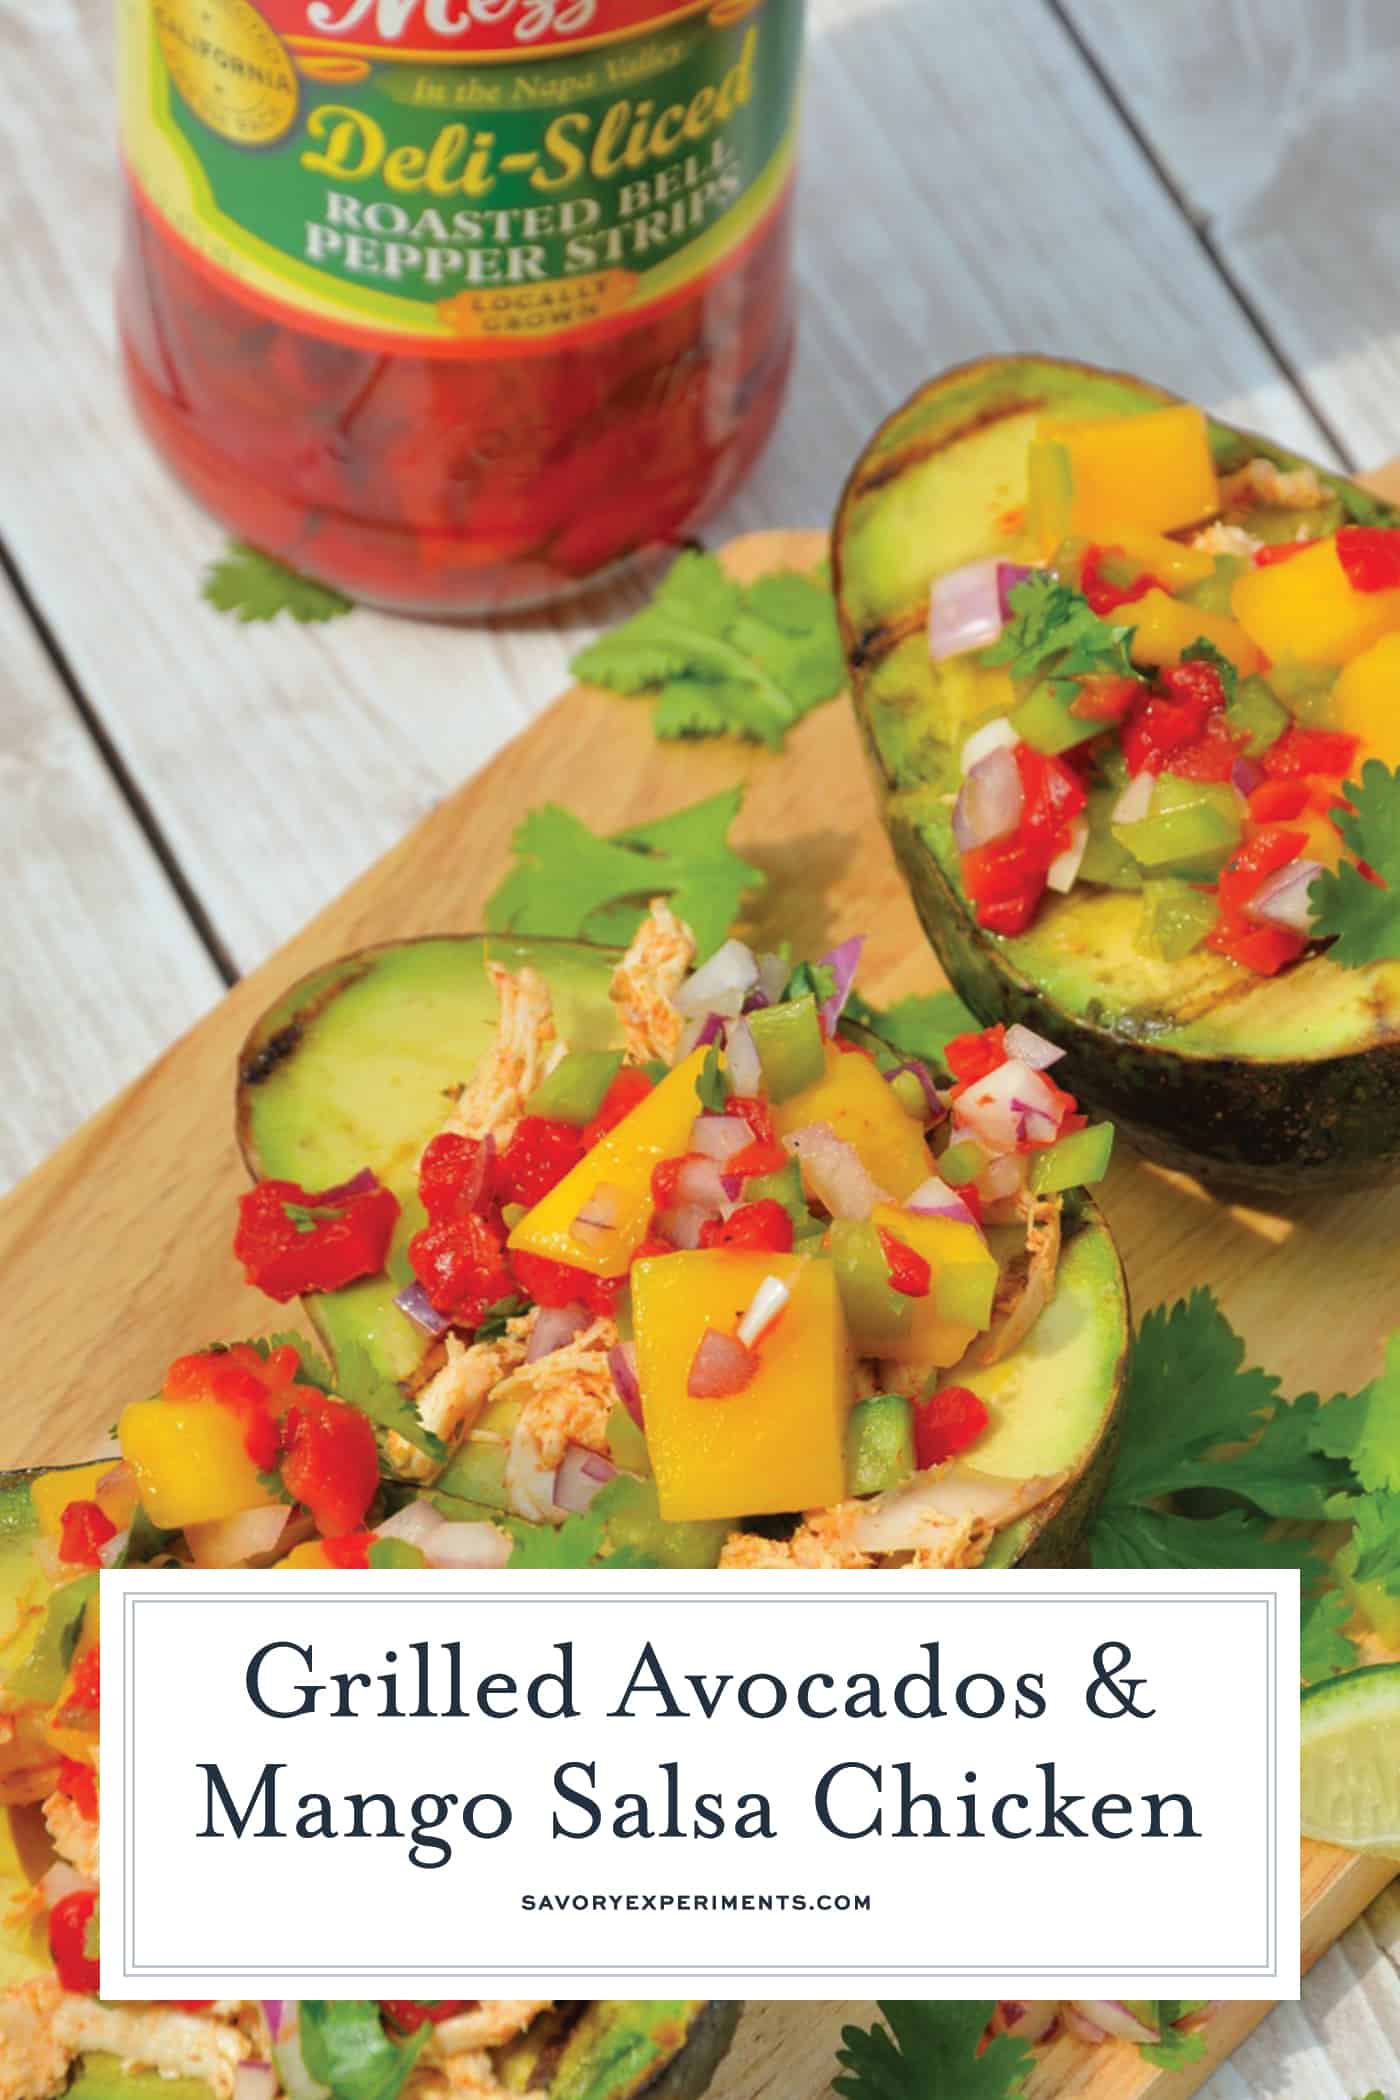 Grilled Avocados with Mango Salsa Chicken - Easy + Healthy!